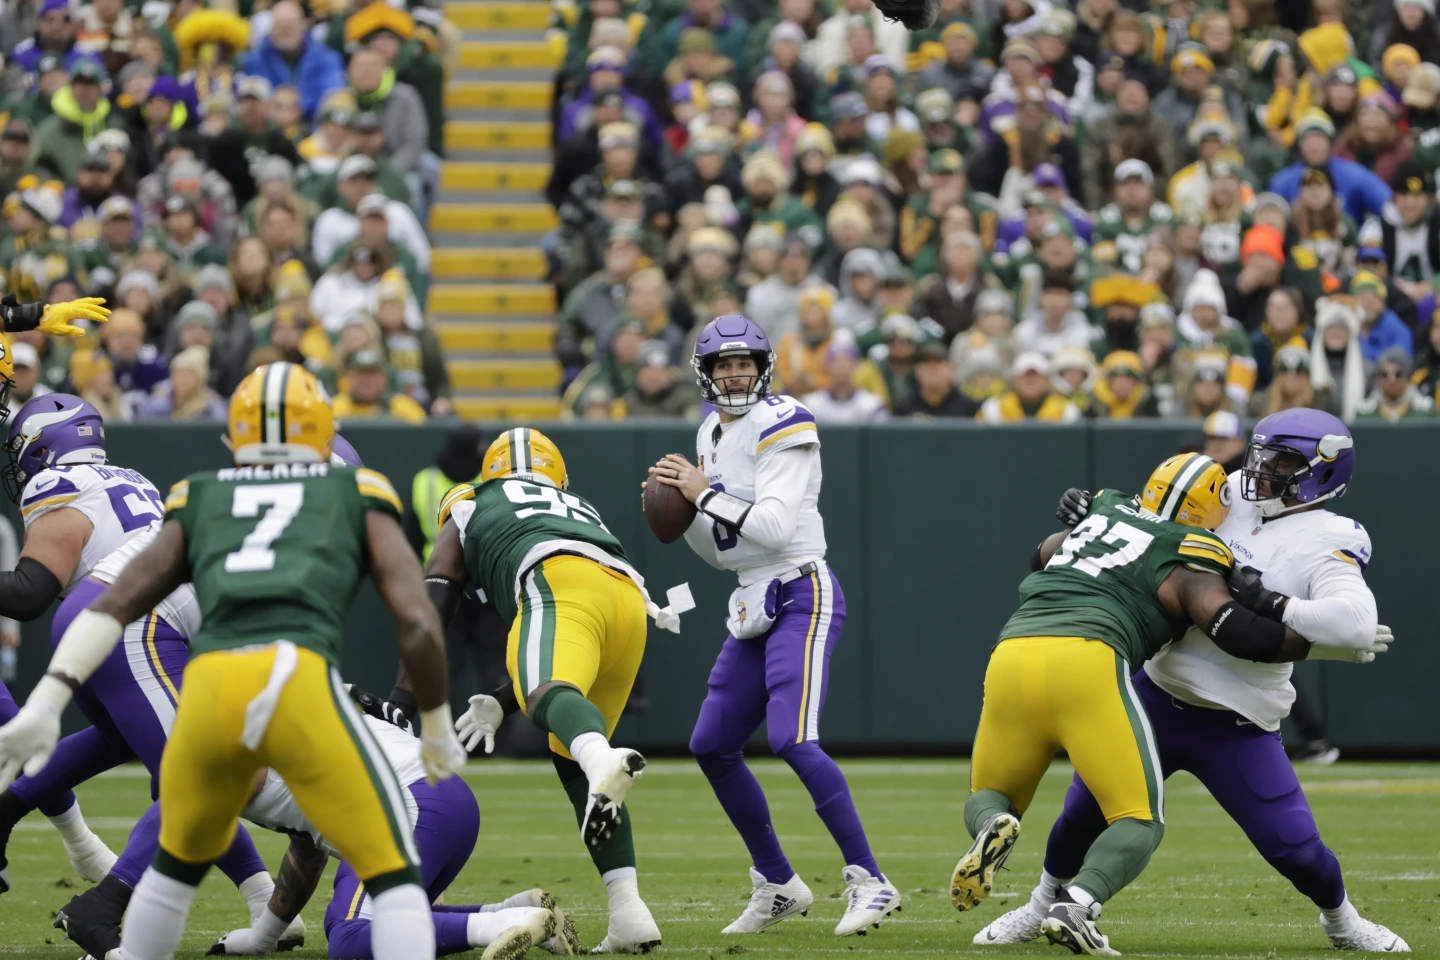 Kirk Cousins (8) of the Minnesota Vikings, center, looks to pass during the first half of an NFL football game against the Green Bay Packers on Sunday, Oct. 29, 2023, in Green Bay, Wis. (Photo by Mike Roemer